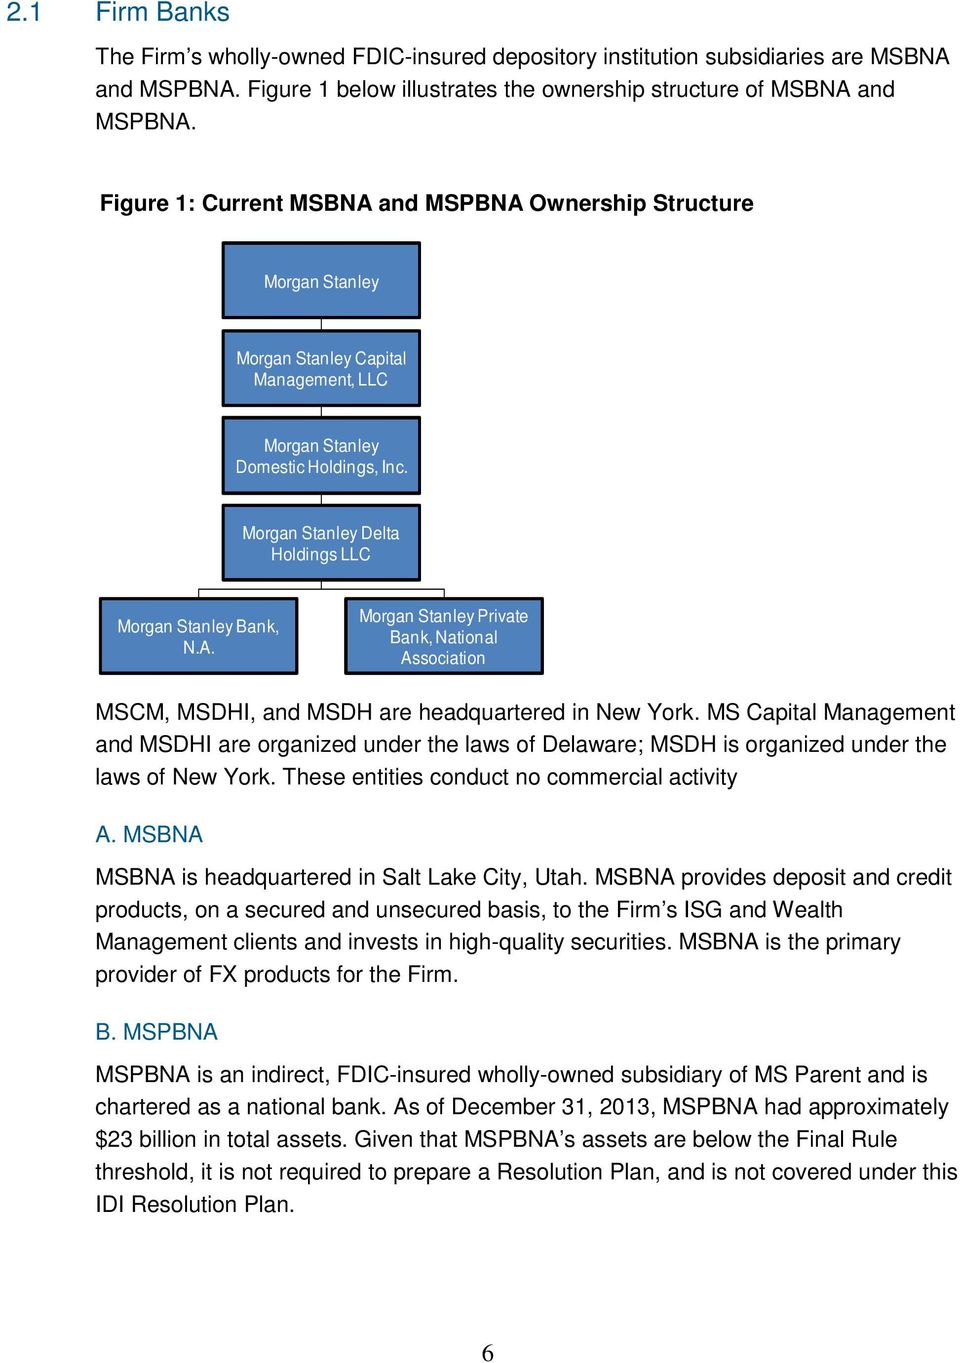 Morgan Stanley Delta Holdings LLC Morgan Stanley Bank, N.A. Morgan Stanley Private Bank, National Association MSCM, MSDHI, and MSDH are headquartered in New York.